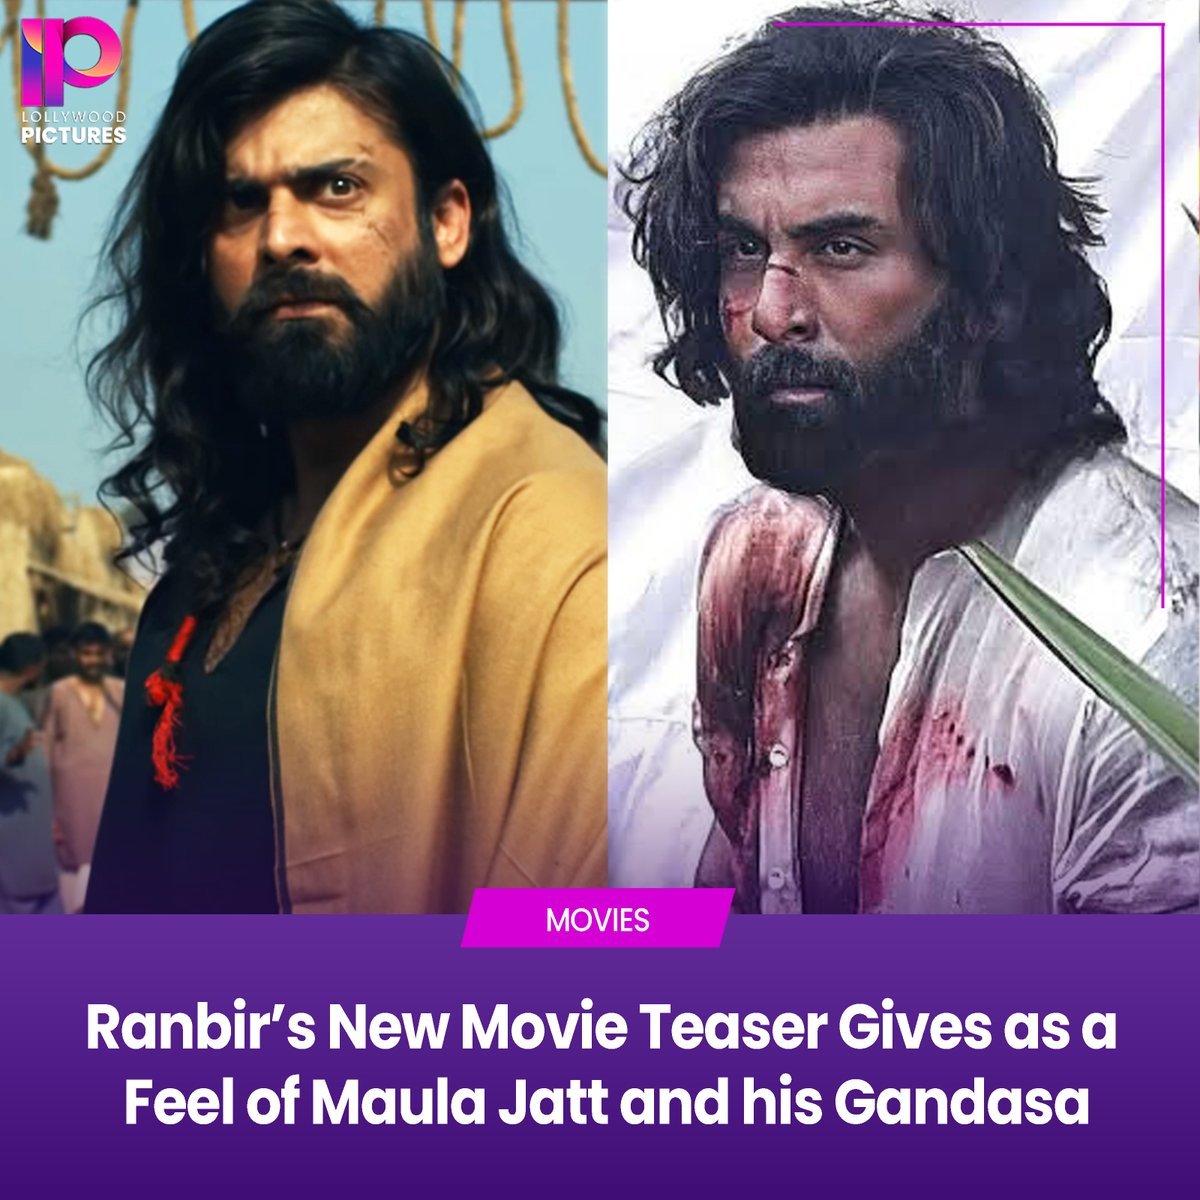 #FawadKhan and #RanbirKapoor both worked together in the Bollywood Movie #AeDilHaiMushkil' and both have experimented with their film roles but Ranbir's New Movie #Animal teaser gives us a feel of Fawad Khan's character in #MaulaJatt and his Gandasa. What's your take on this? 🤔